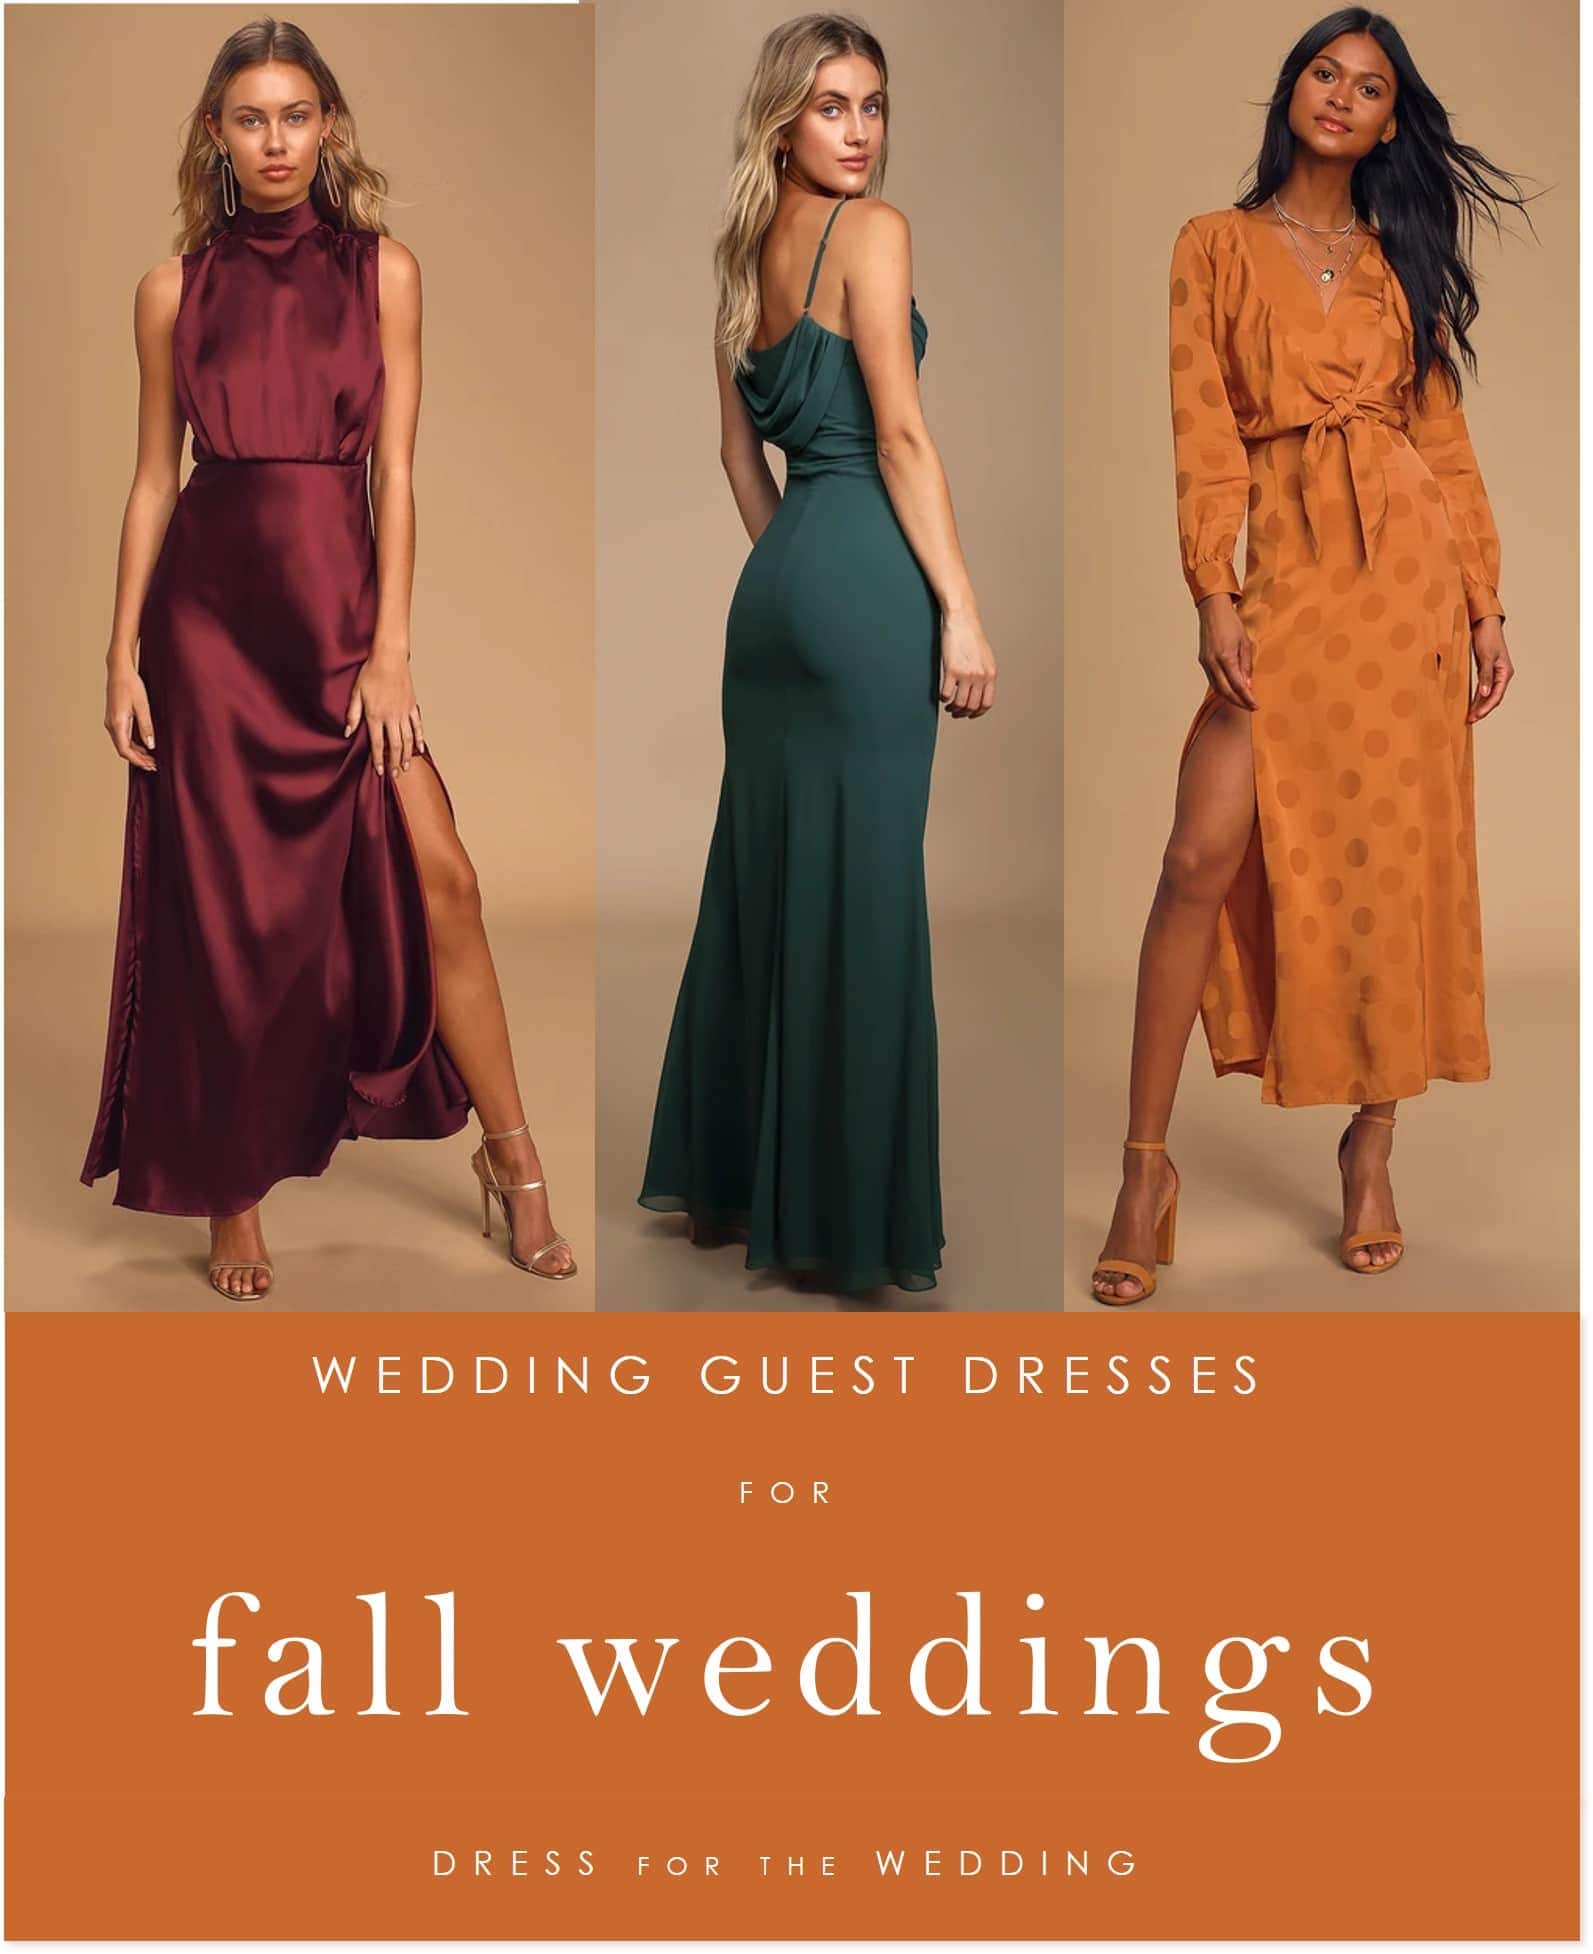 Fall Wedding Guest Dresses Dress for the Wedding